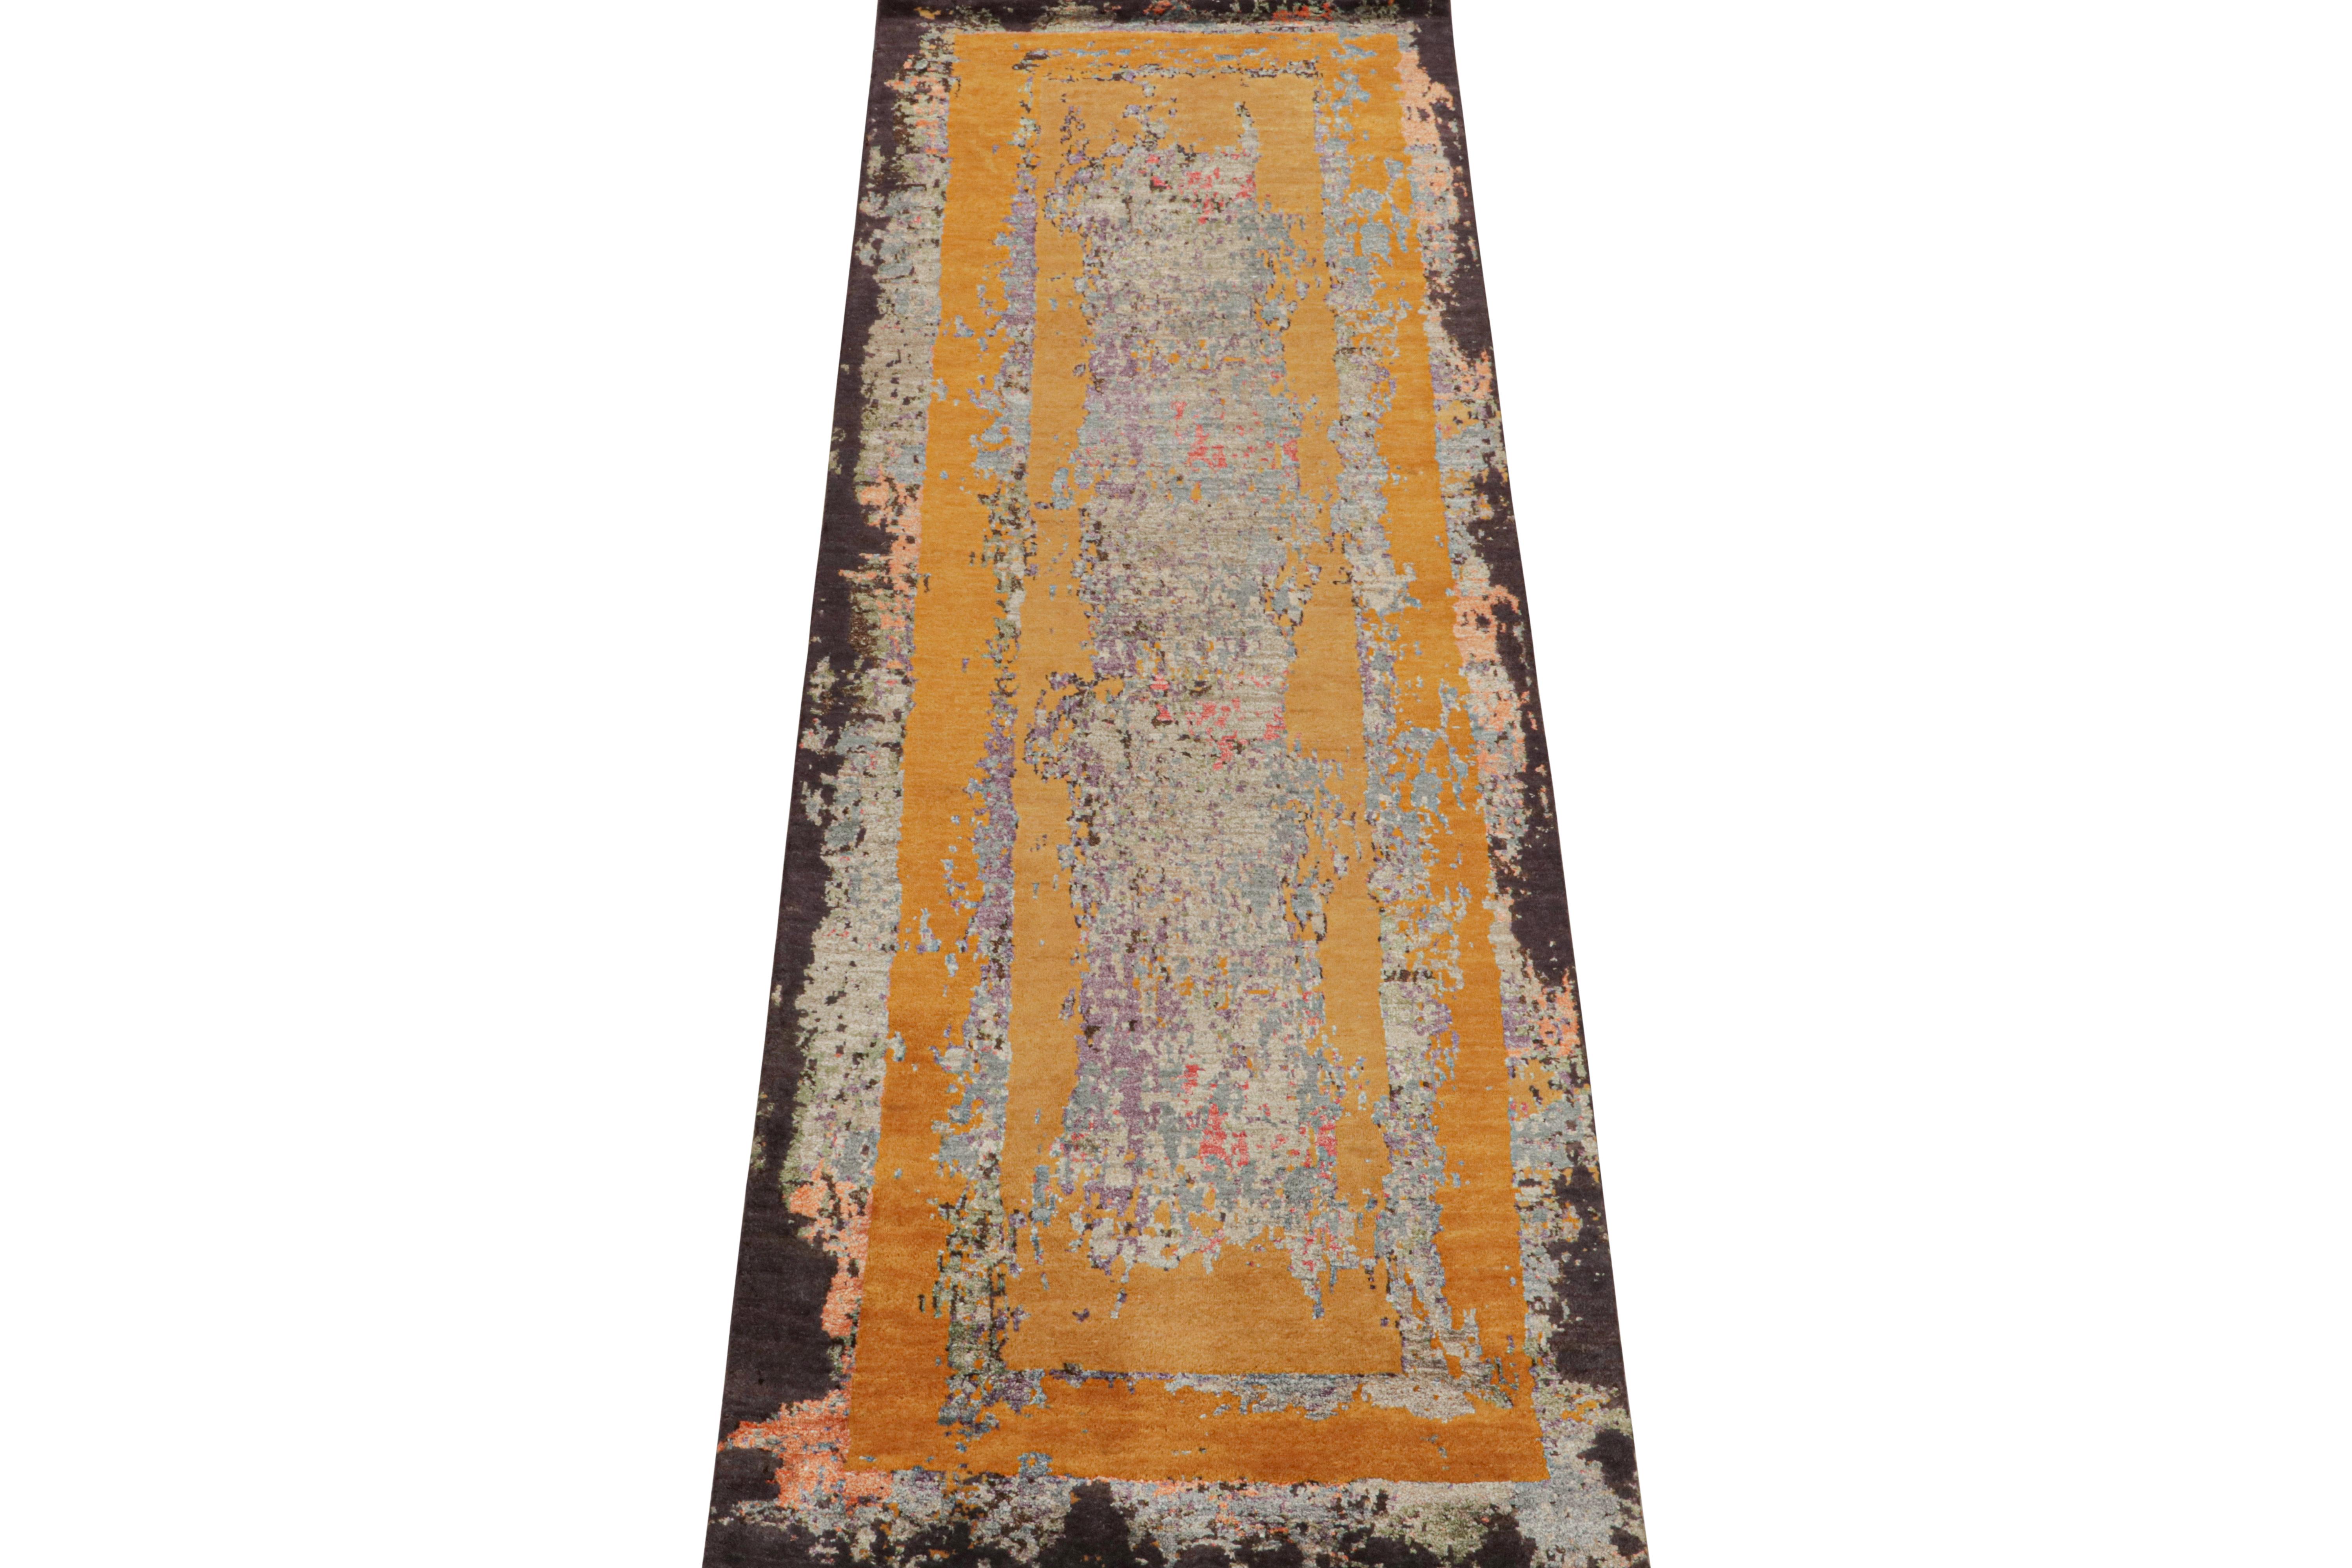 This 3x9 abstract runner is a new addition to Rug & Kilim’s Modern rug collection. Hand-knotted in wool, cotton and silk, its design plays with abstract sensibilities in a bold modern fashion.

Further on the Design:

This is a masterpiece from